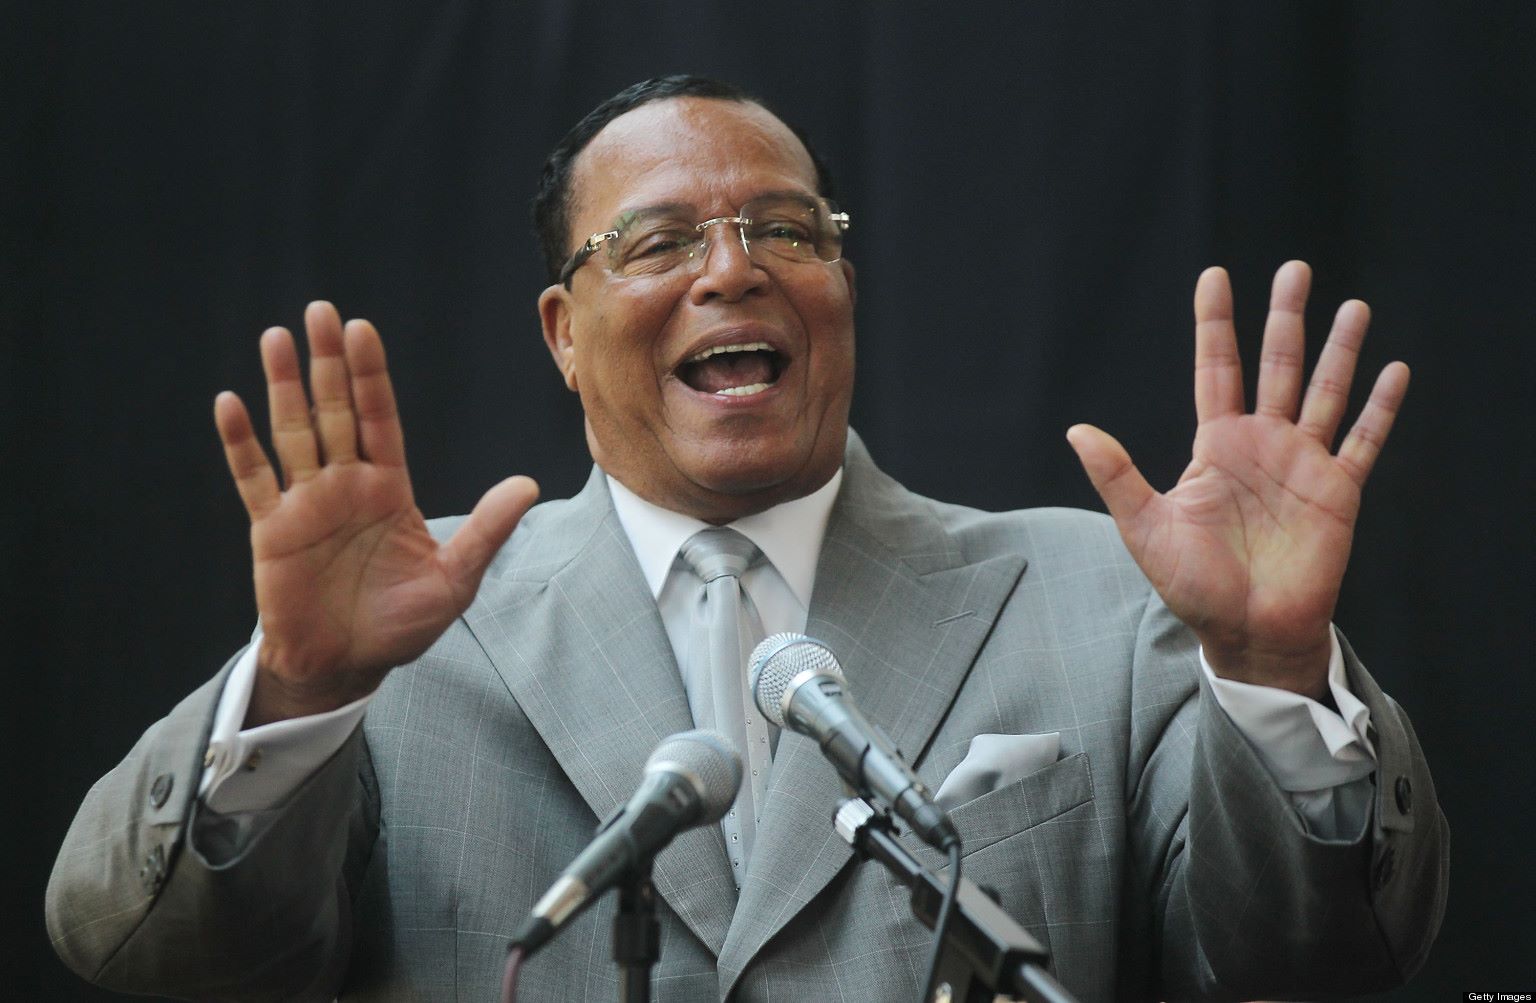 Farrakhan reacts to his ban on Facebook Religious leader